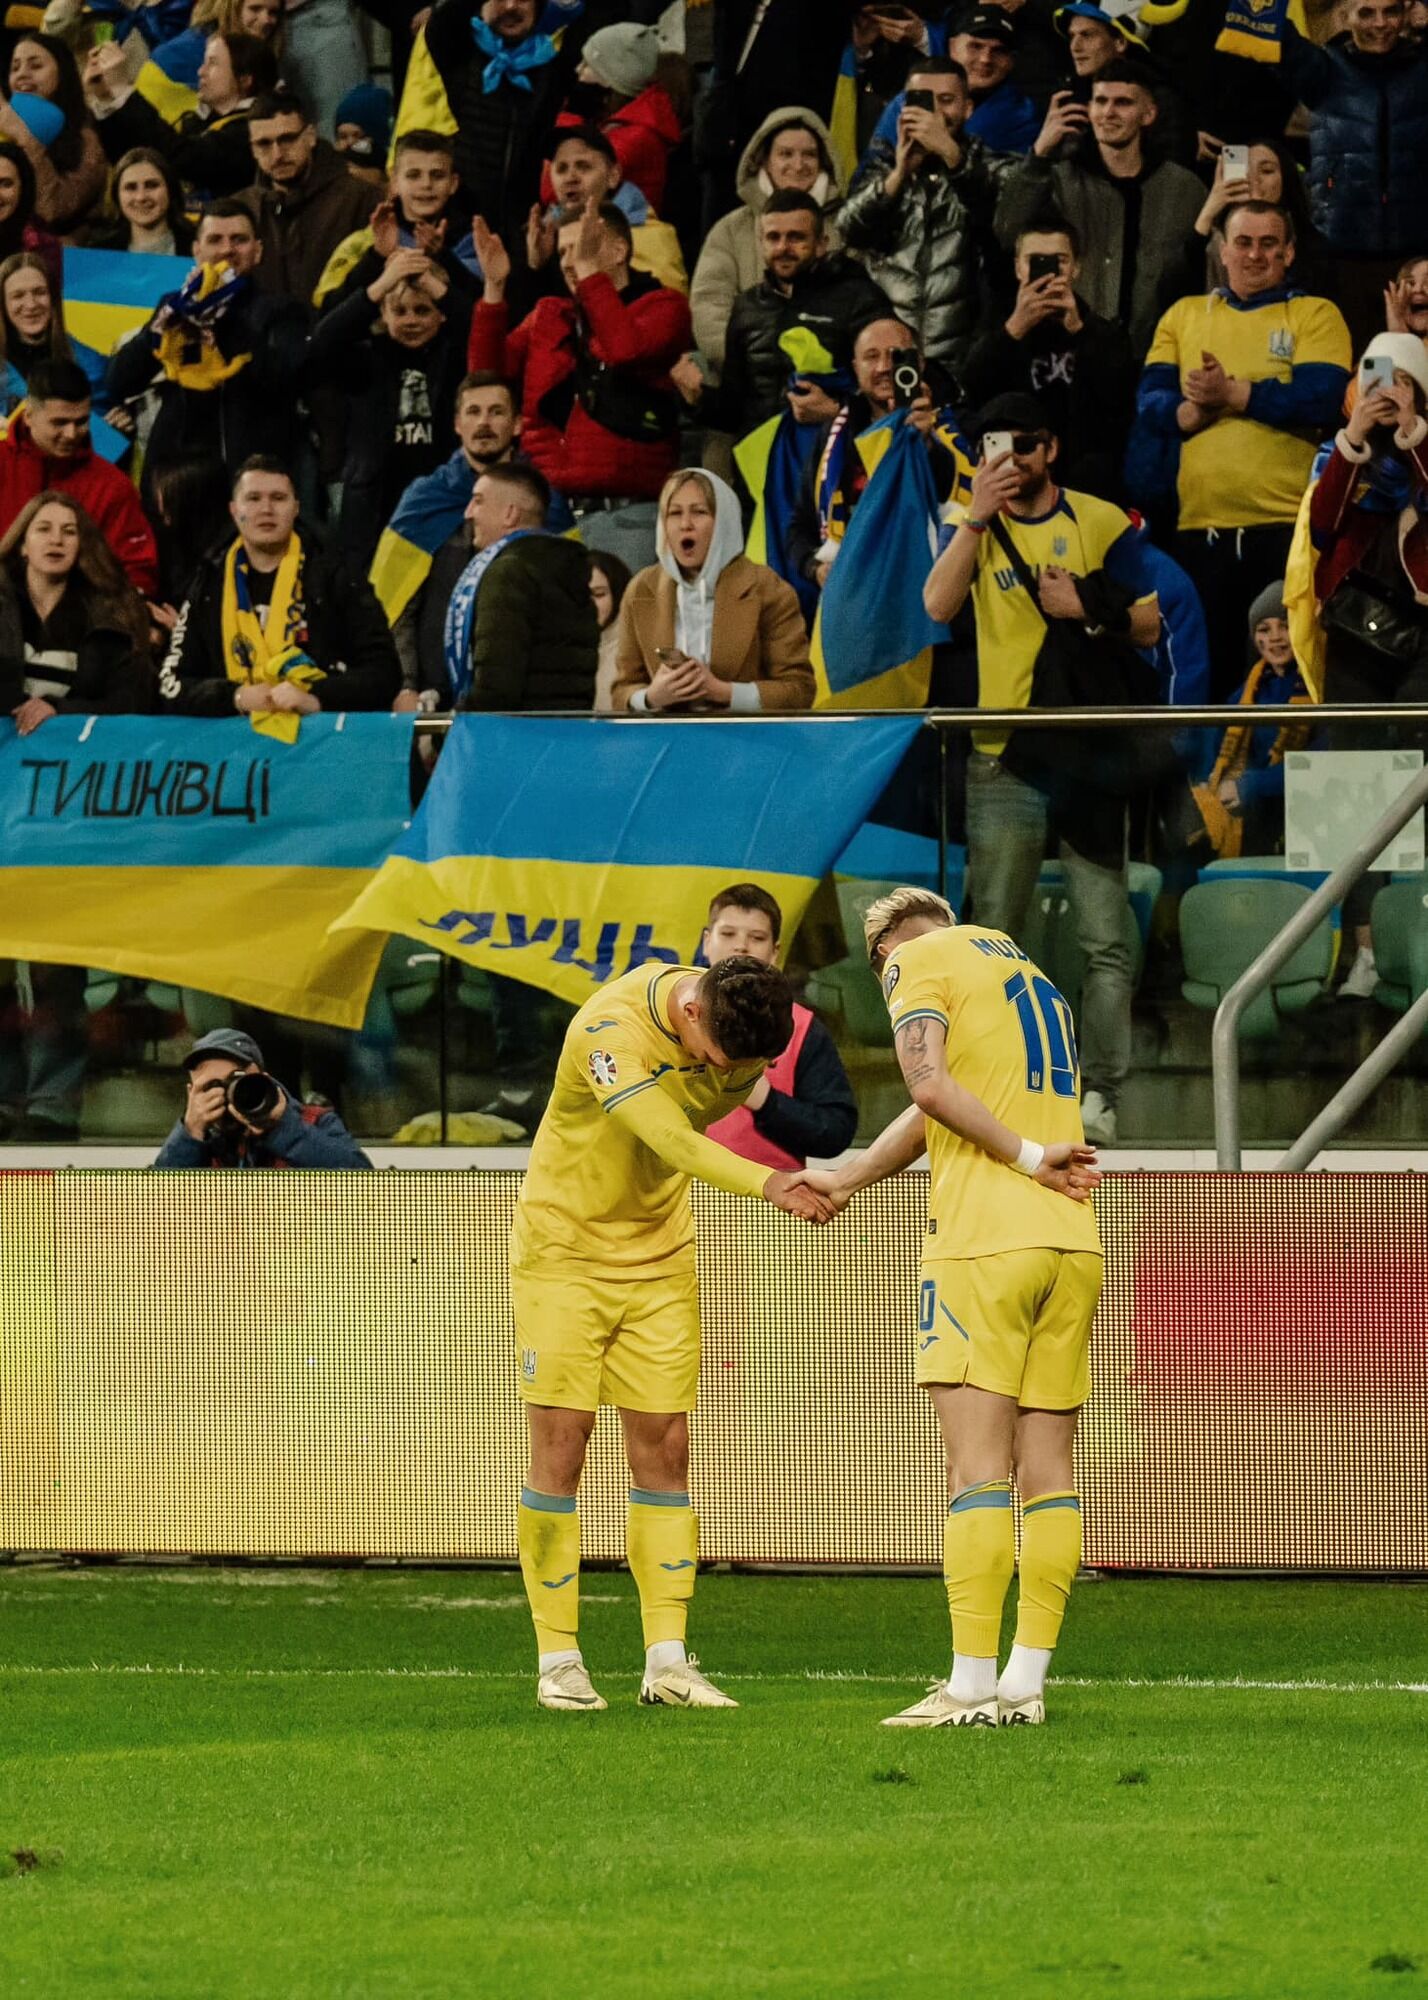 There is a record: the Ukrainian national team made history at Euro 2024